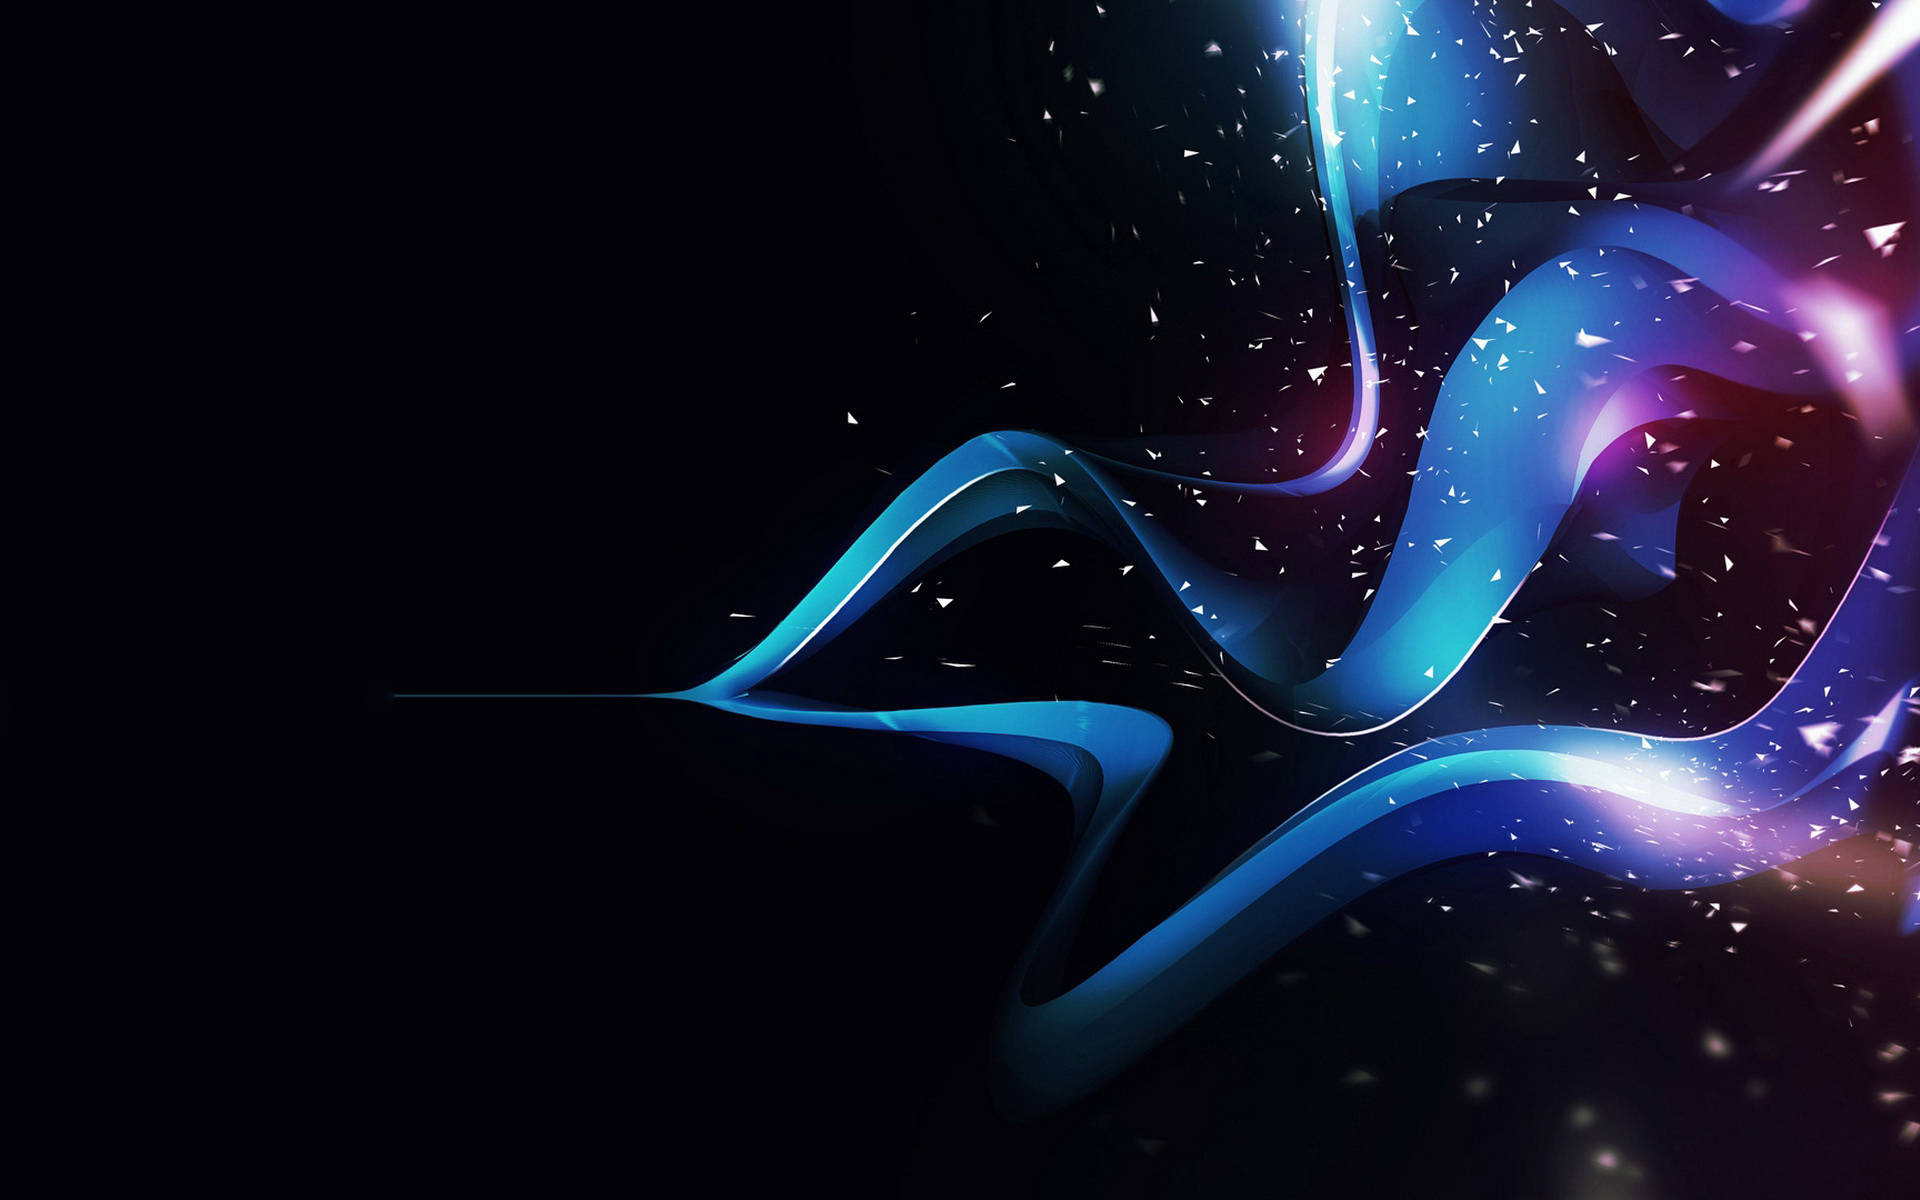 Digital Sculpture On Black And Blue Background Picture